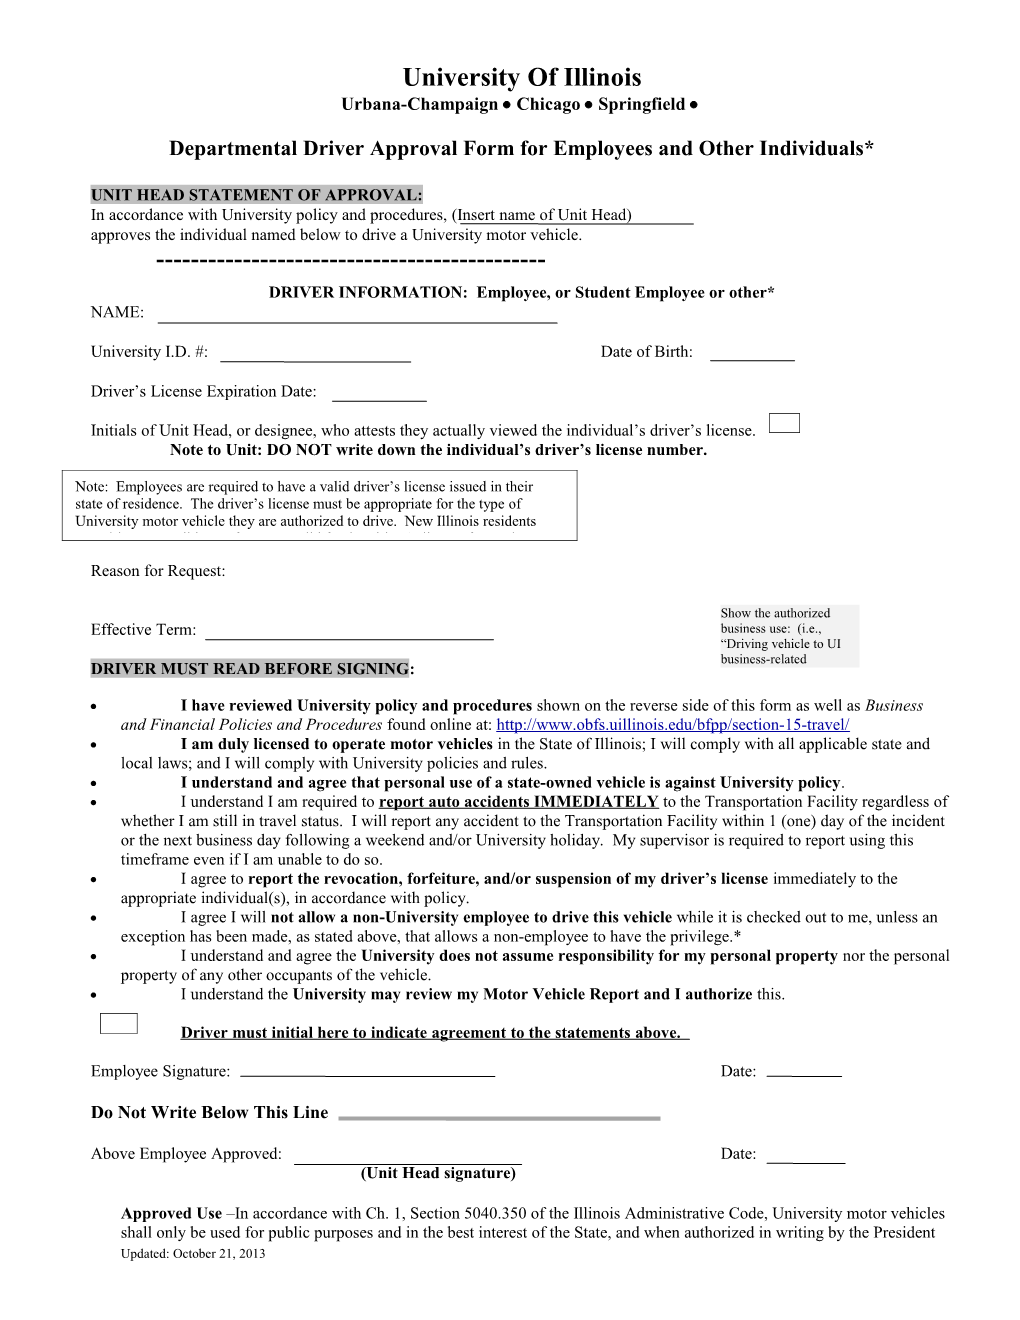 Departmental Driver Approval Form (Including Employees, Student Employees, and Others)